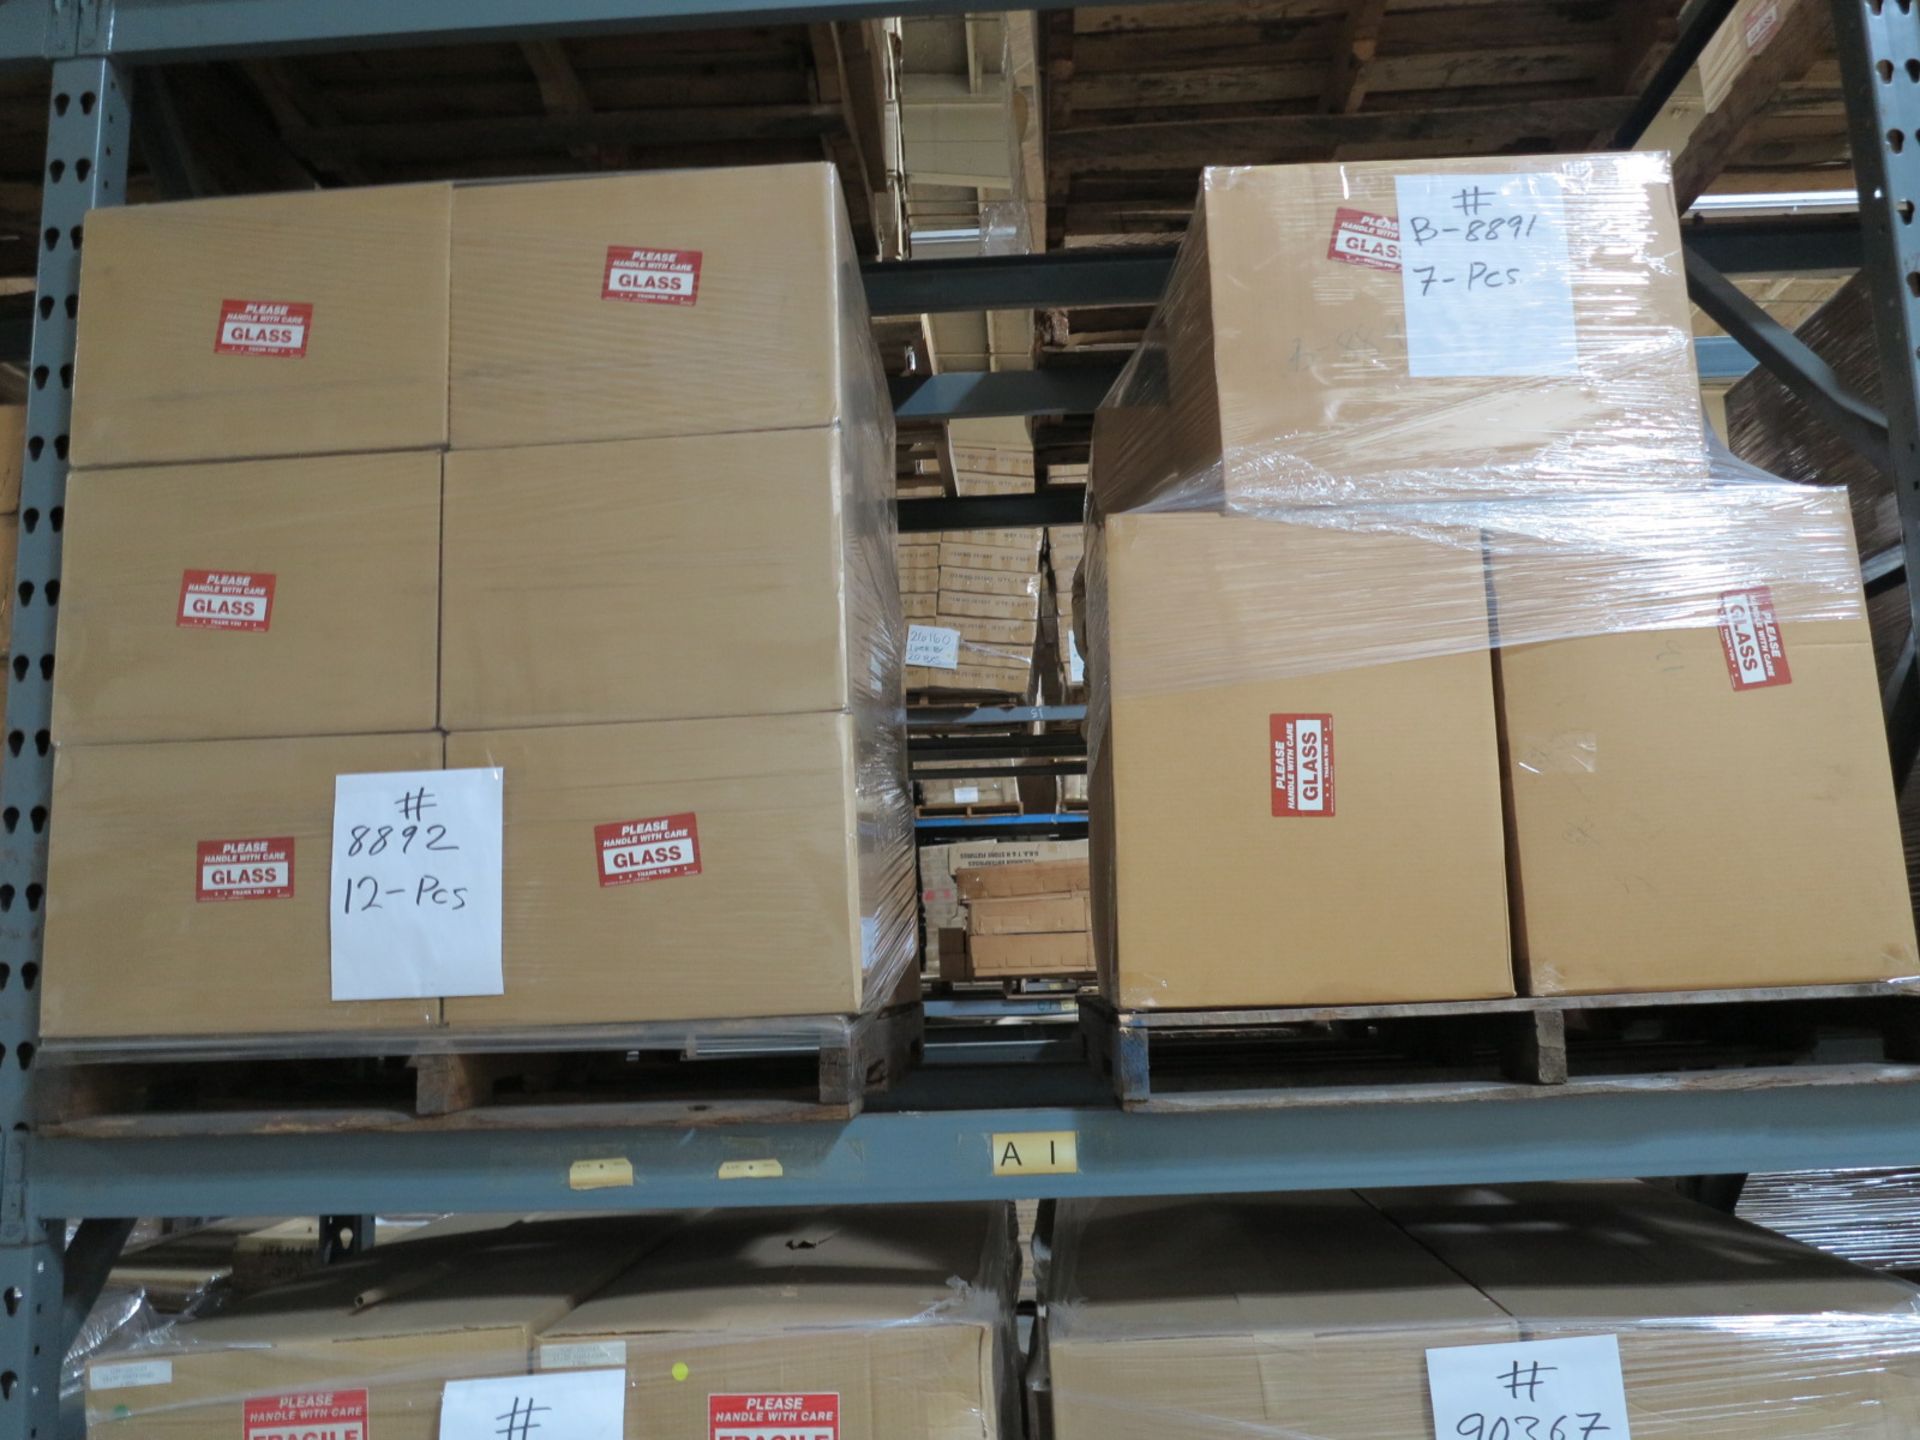 LOT - CONTENTS OF (3) SECTIONS OF PALLET RACK TO INCLUDE: ITEM # 90363, ACCESSORY STAND MIRROR, - Bild 7 aus 11